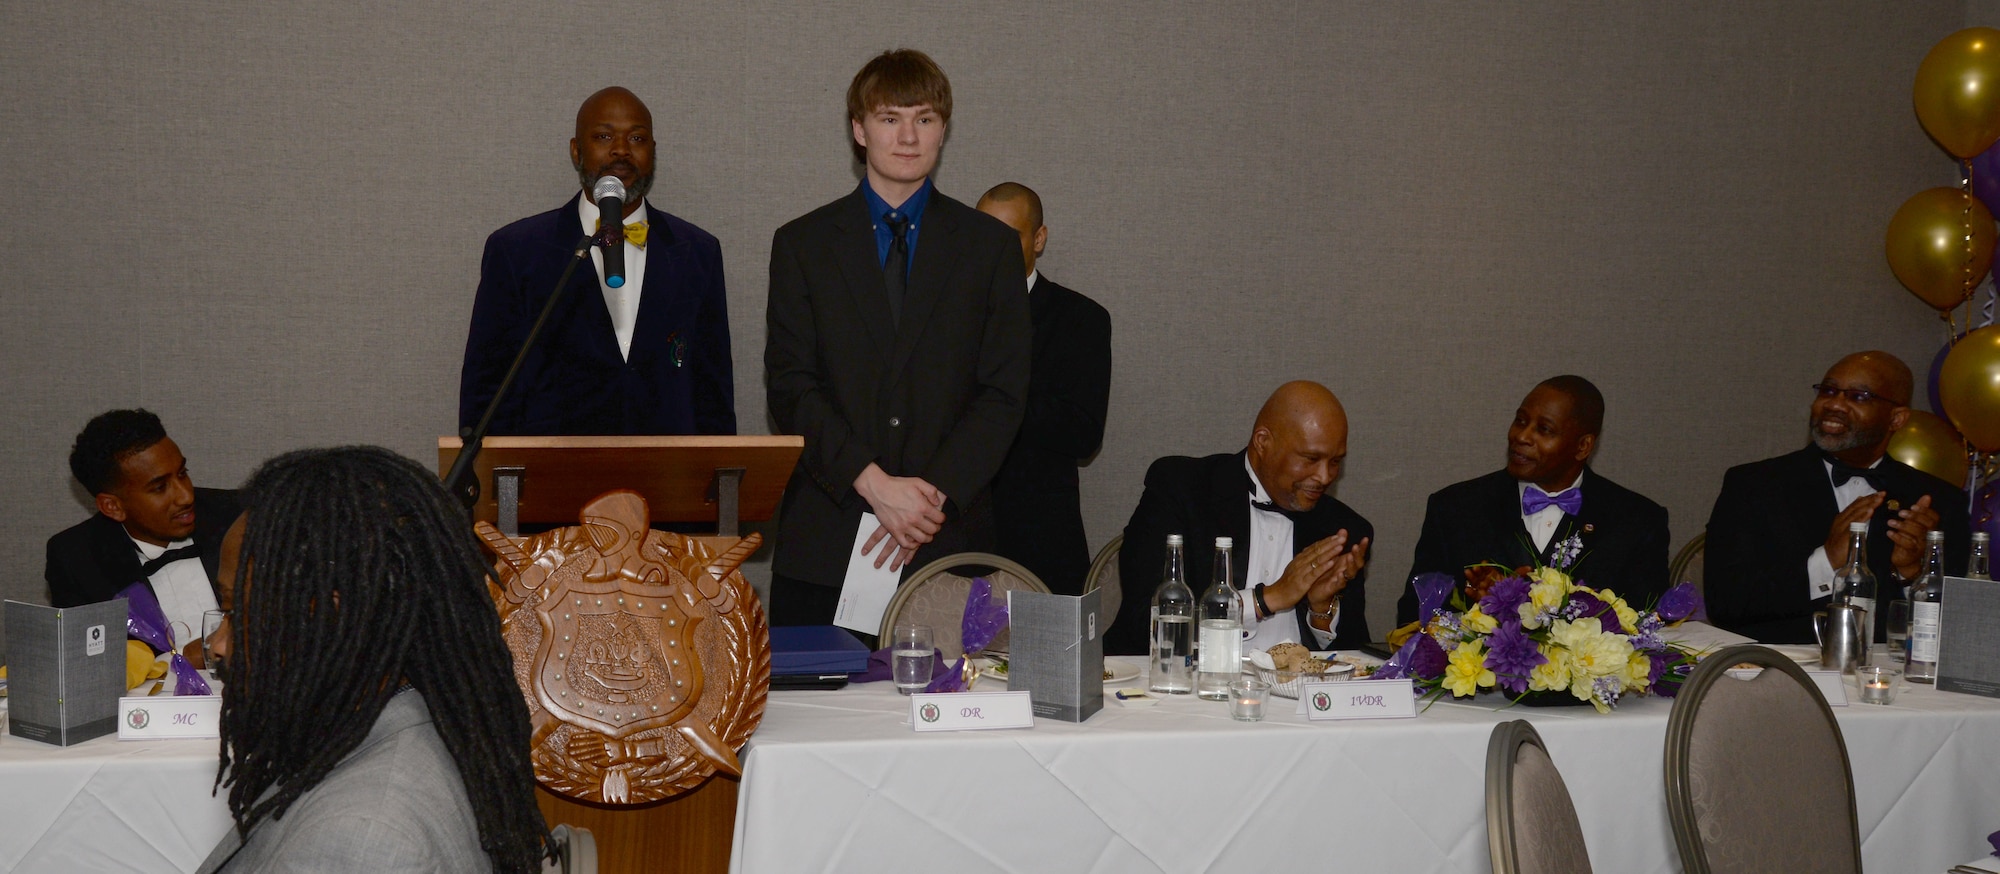 A RAF Lakenheath High School student, center, is awarded an $800 scholarship April 18, 2017, for his submission to an essay contest awarded by the Omega Psi Phi Fraternity Inc., at a banquet in Birmingham, England. Sitting at the head table were district representatives and leaders of the fraternity. The evening was held to celebrate the fifth anniversary of the Chi Mu Mu chapter in the U.K. (U.S. Air Force photo by Senior Airman Justine Rho)